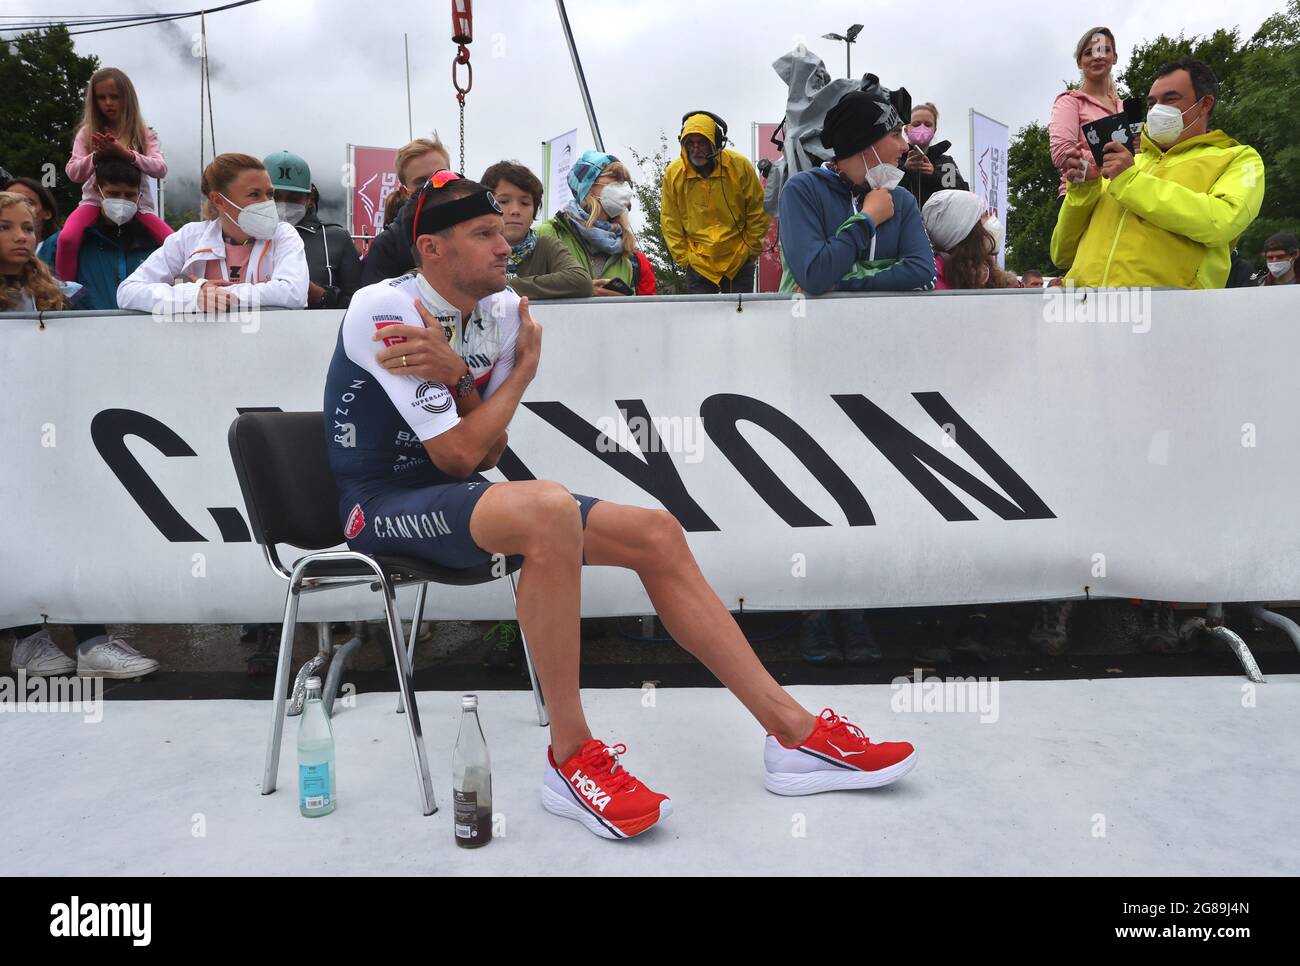 Immenstadt, Germany. 18th July, 2021. Jan Frodeno, triathlete from Germany,  sits at the Tri Battle Royal, freezing at the finish line. Credit:  Karl-Josef Hildenbrand/dpa/Alamy Live News Stock Photo - Alamy